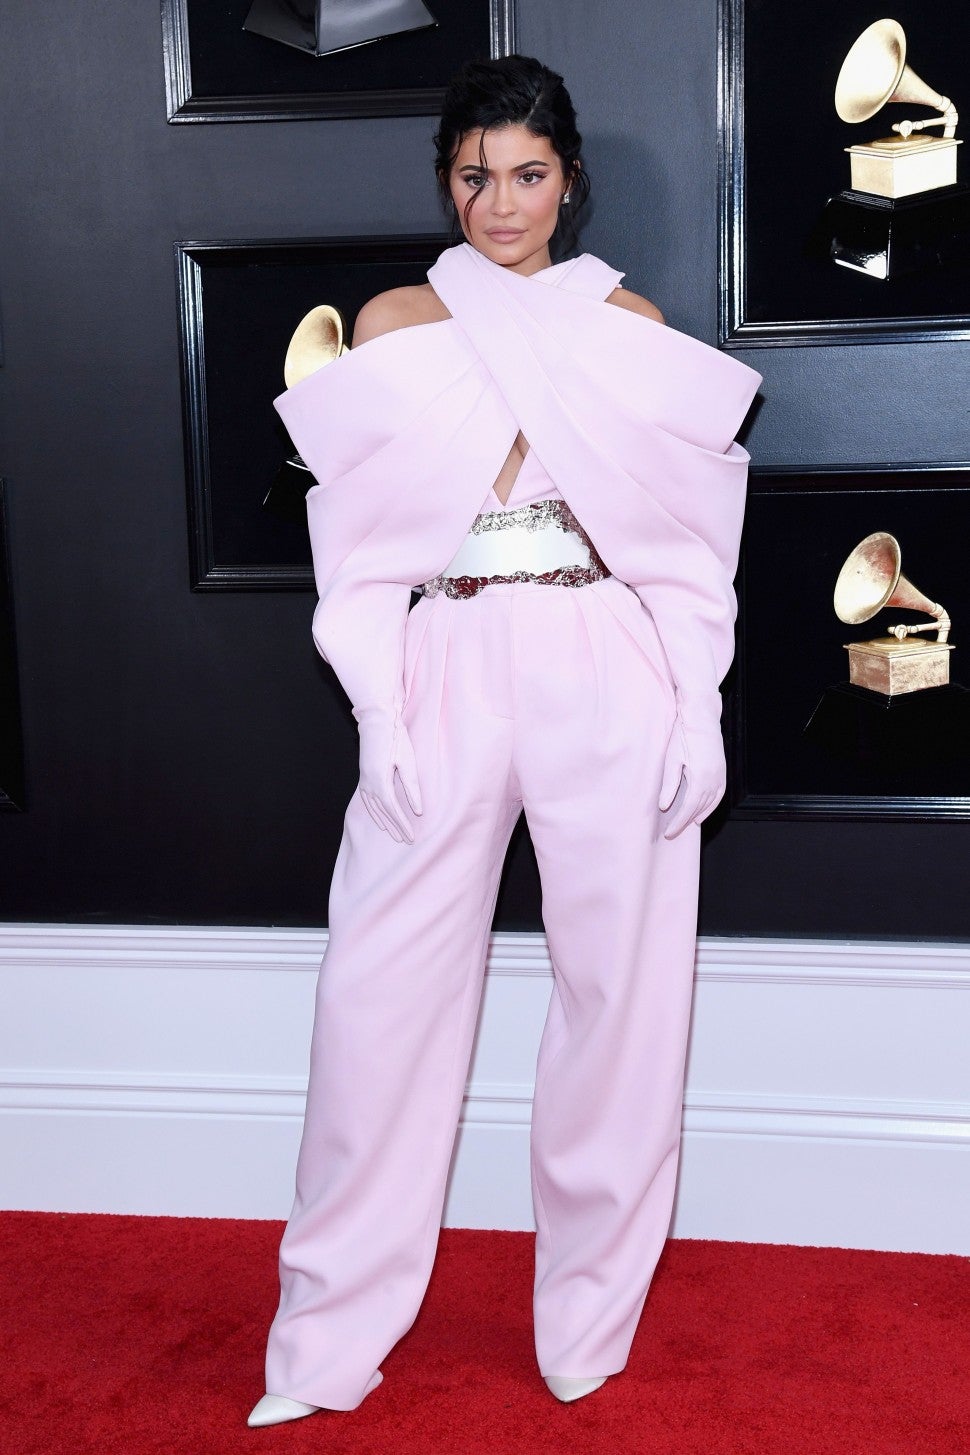 Kylie Jenner at Grammys